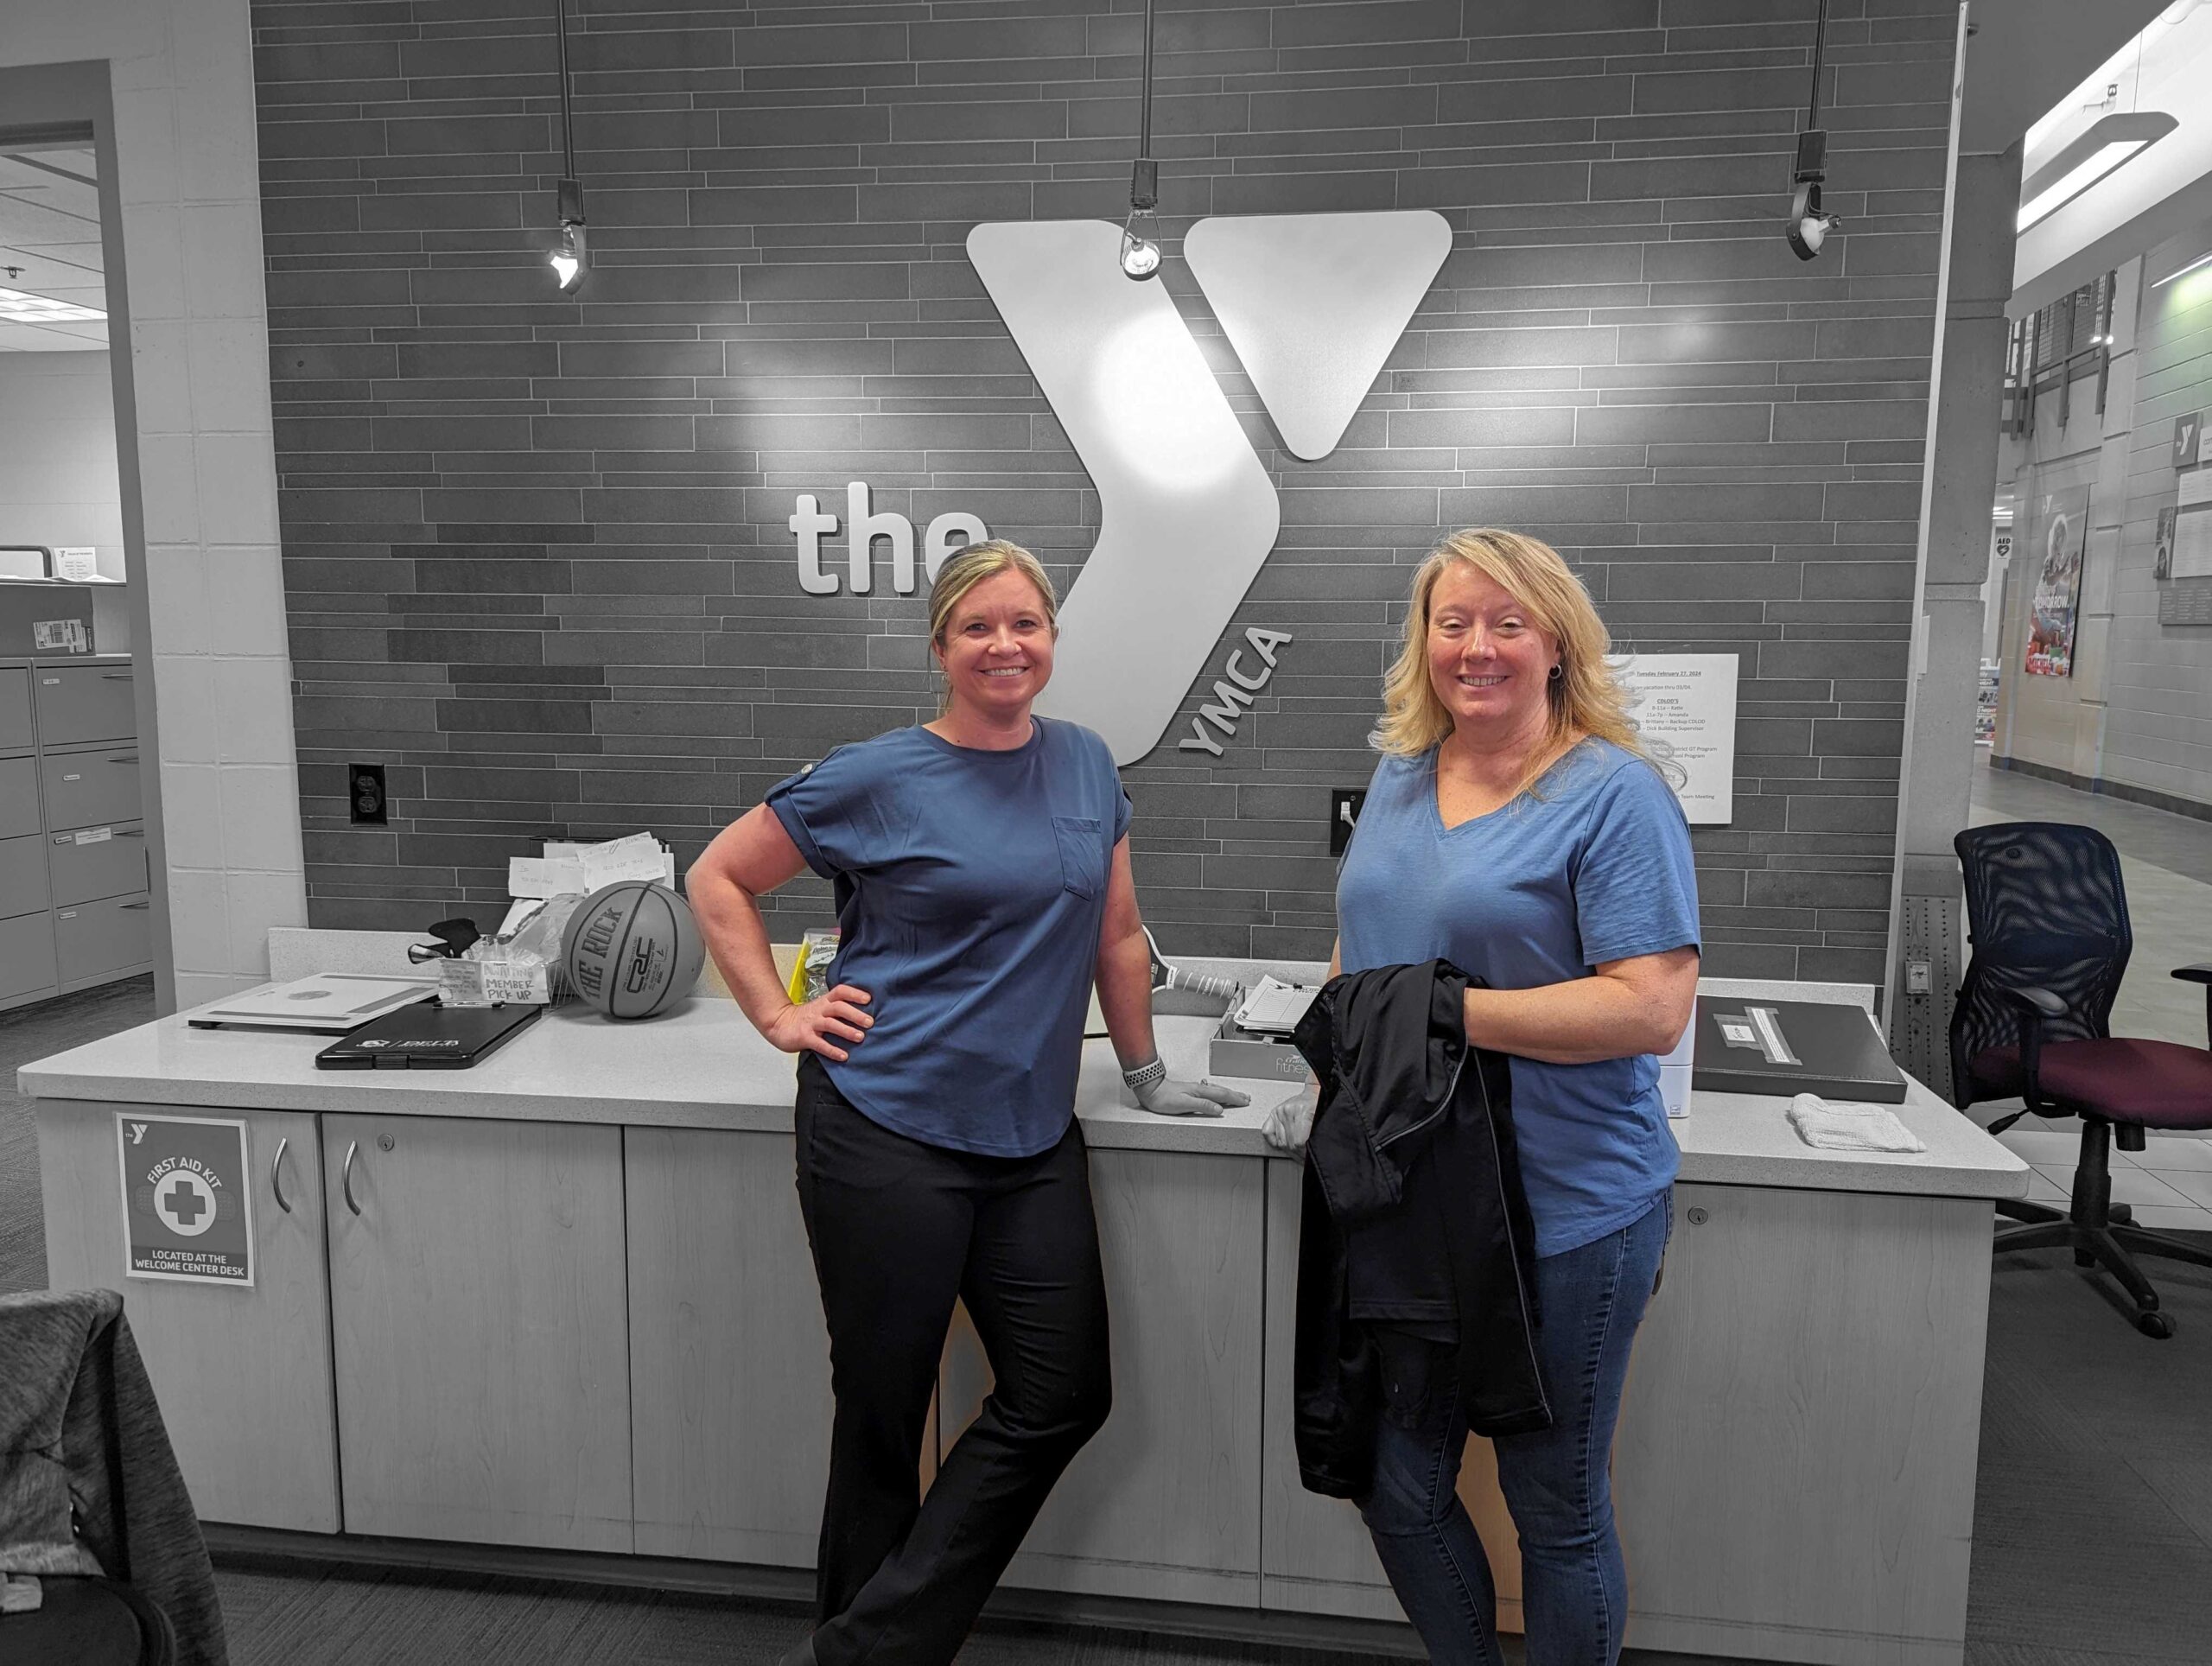 Jill and Tracy by the YMCA counter